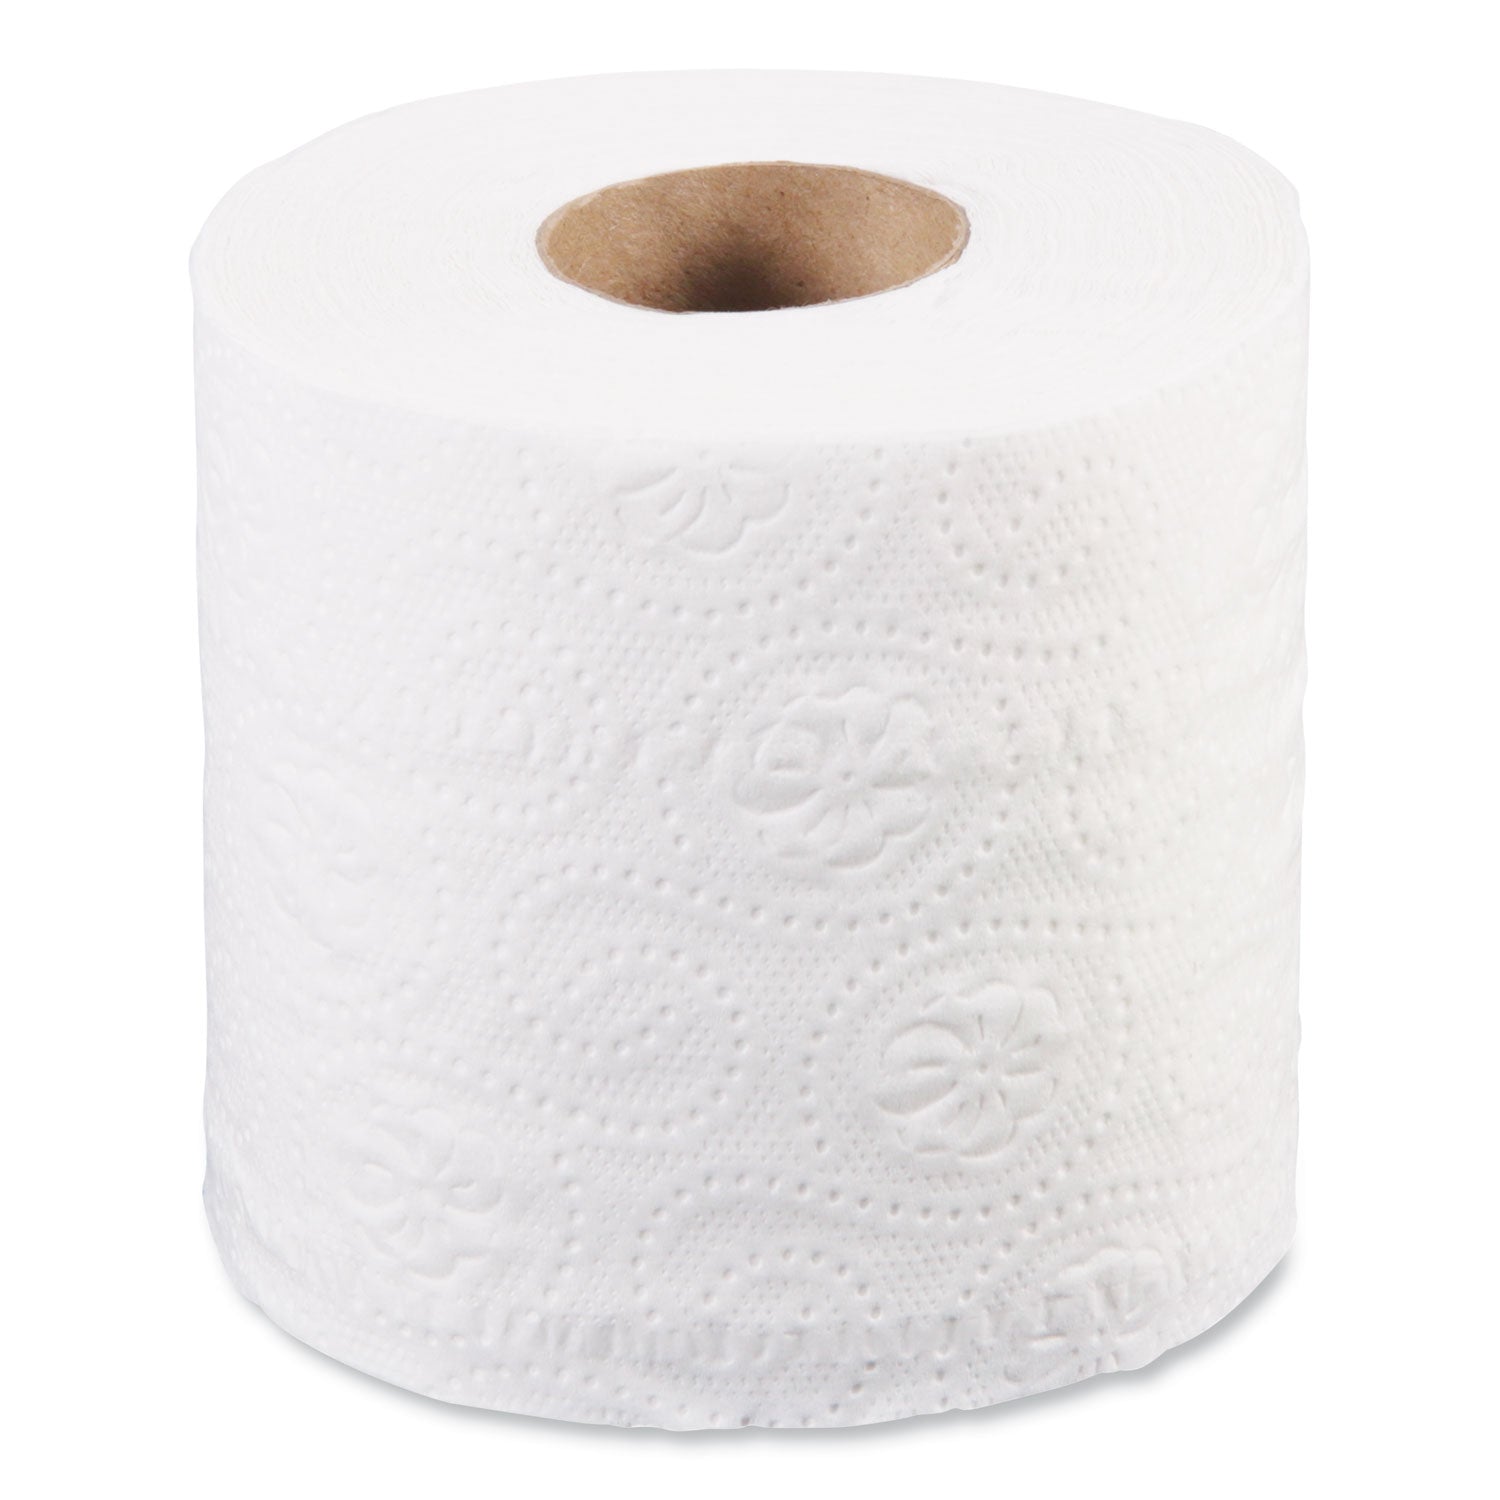 Bath Tissue, Septic Safe, Individually Wrapped Rolls, 2-Ply, White, 400 Sheets/Roll, 24 Rolls/Carton - 